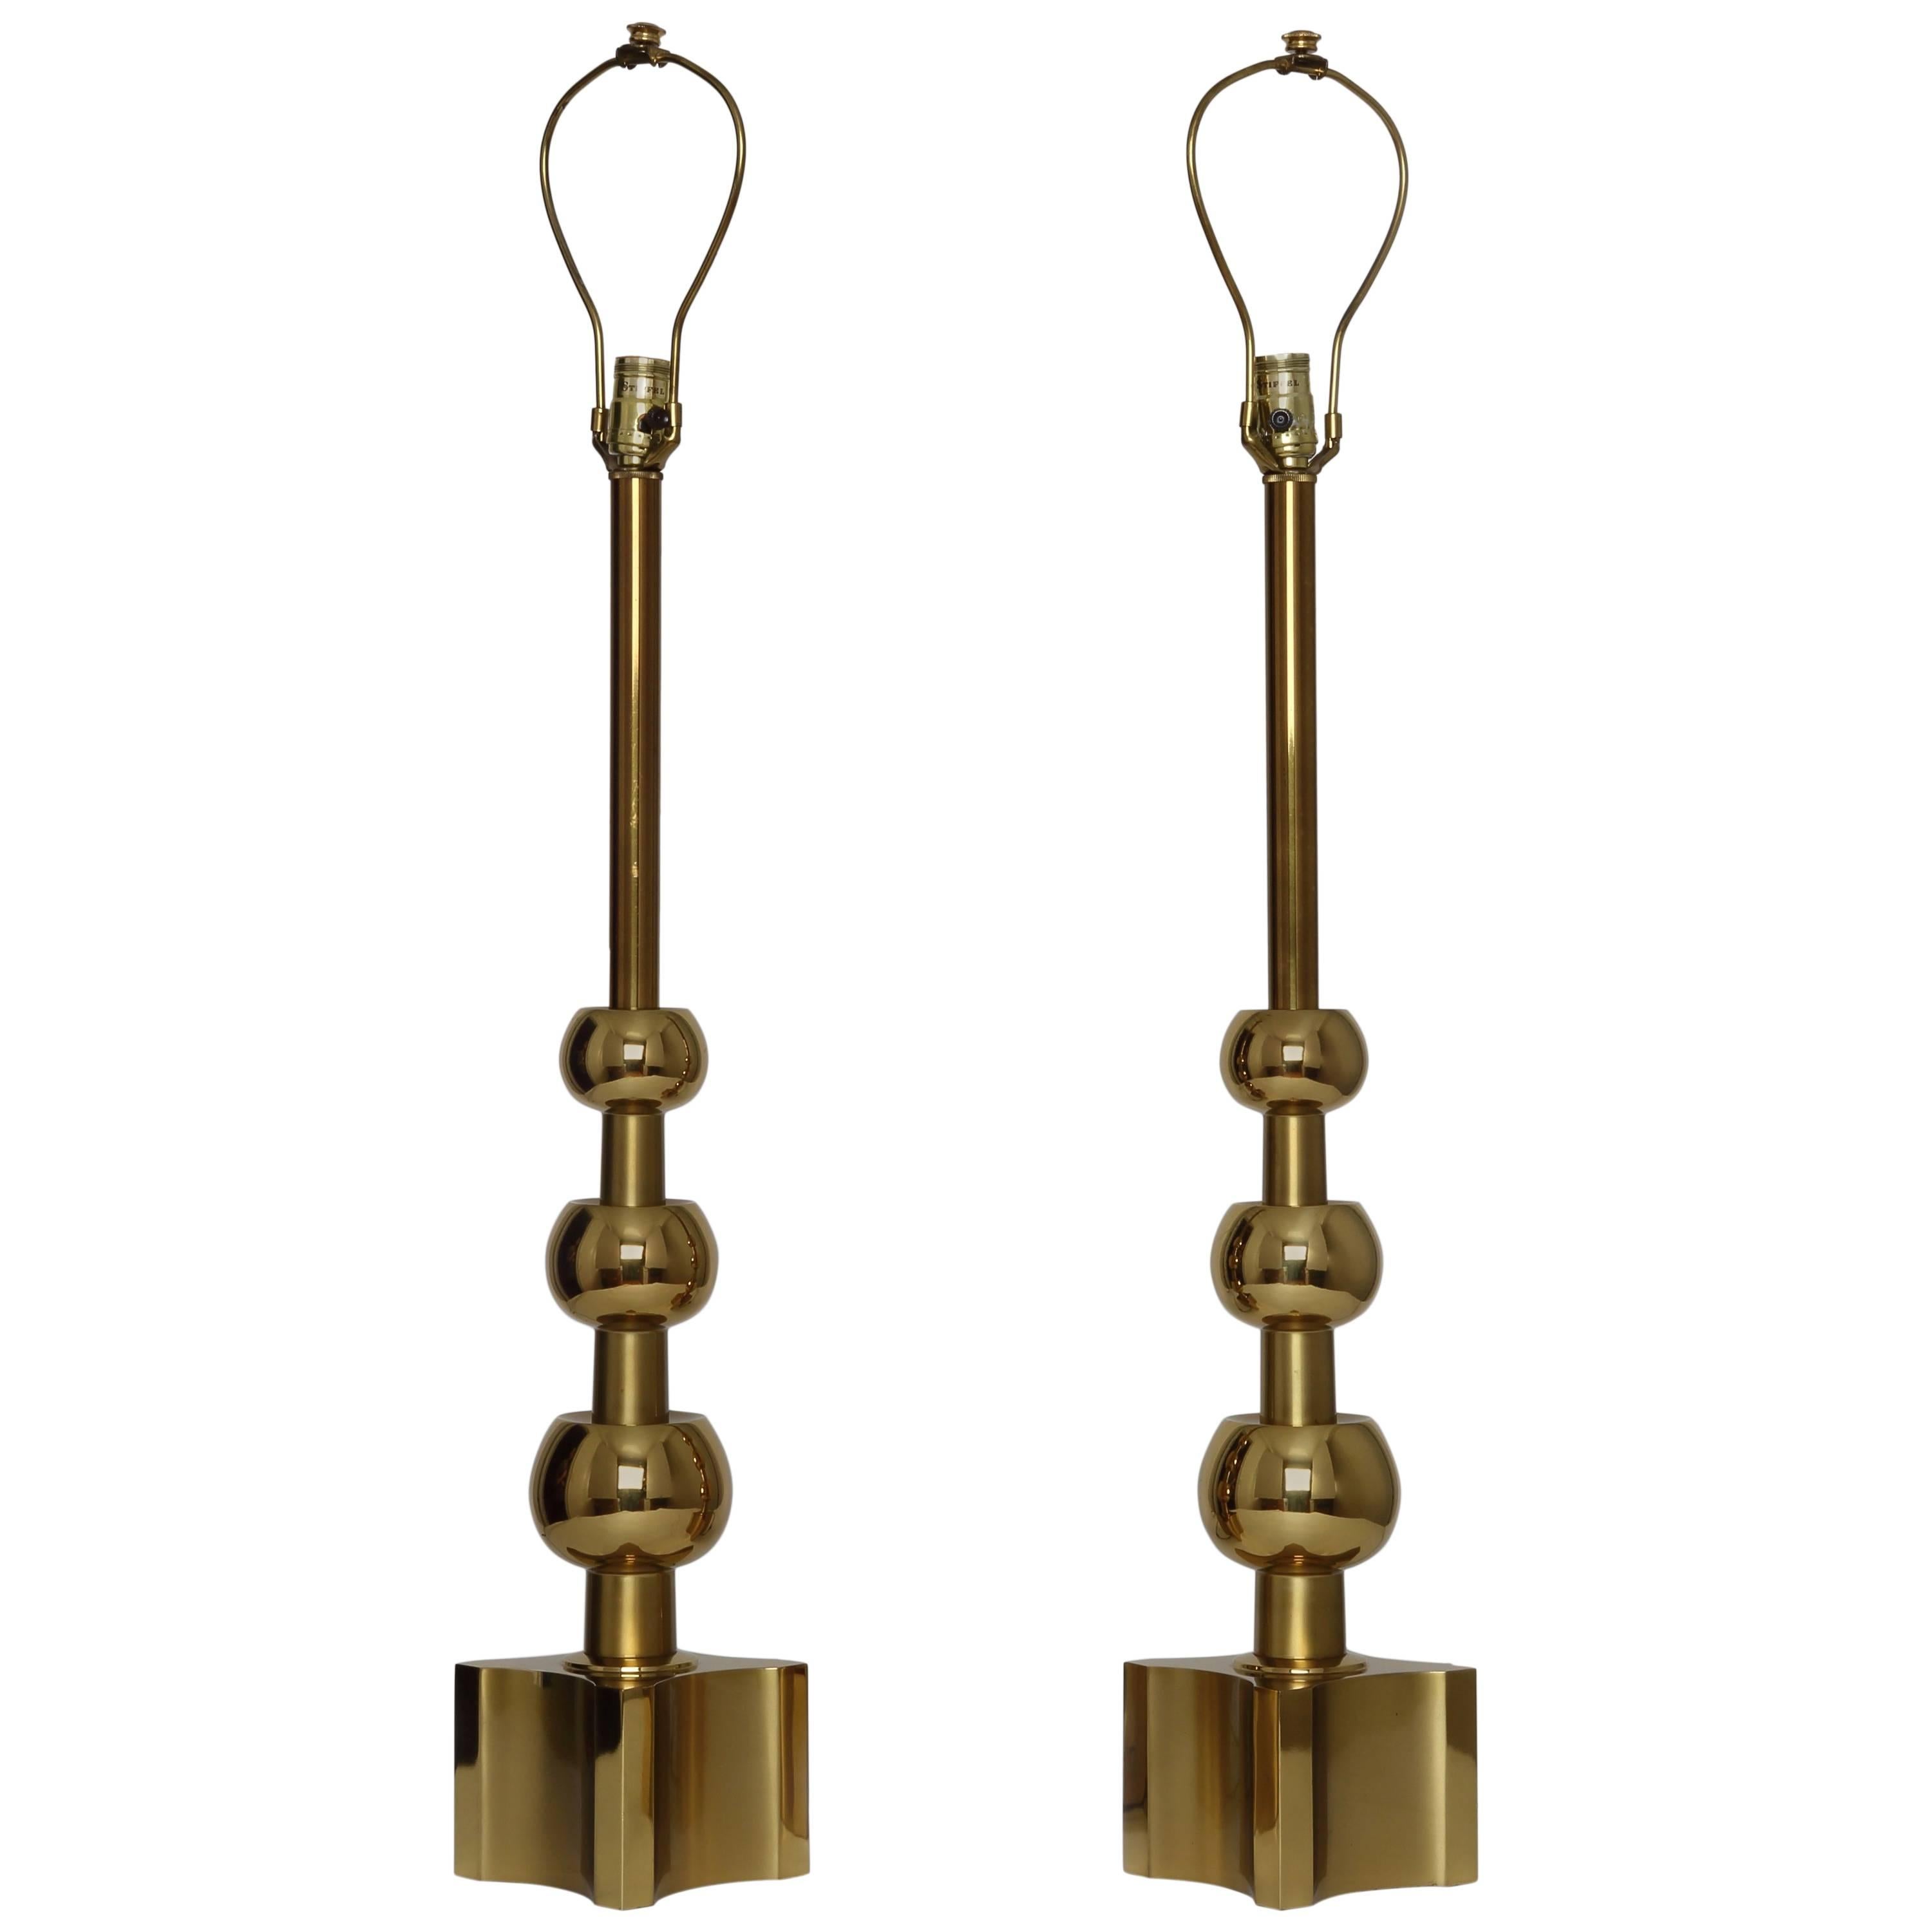 Pair of Brass Table Lamps by Stiffel